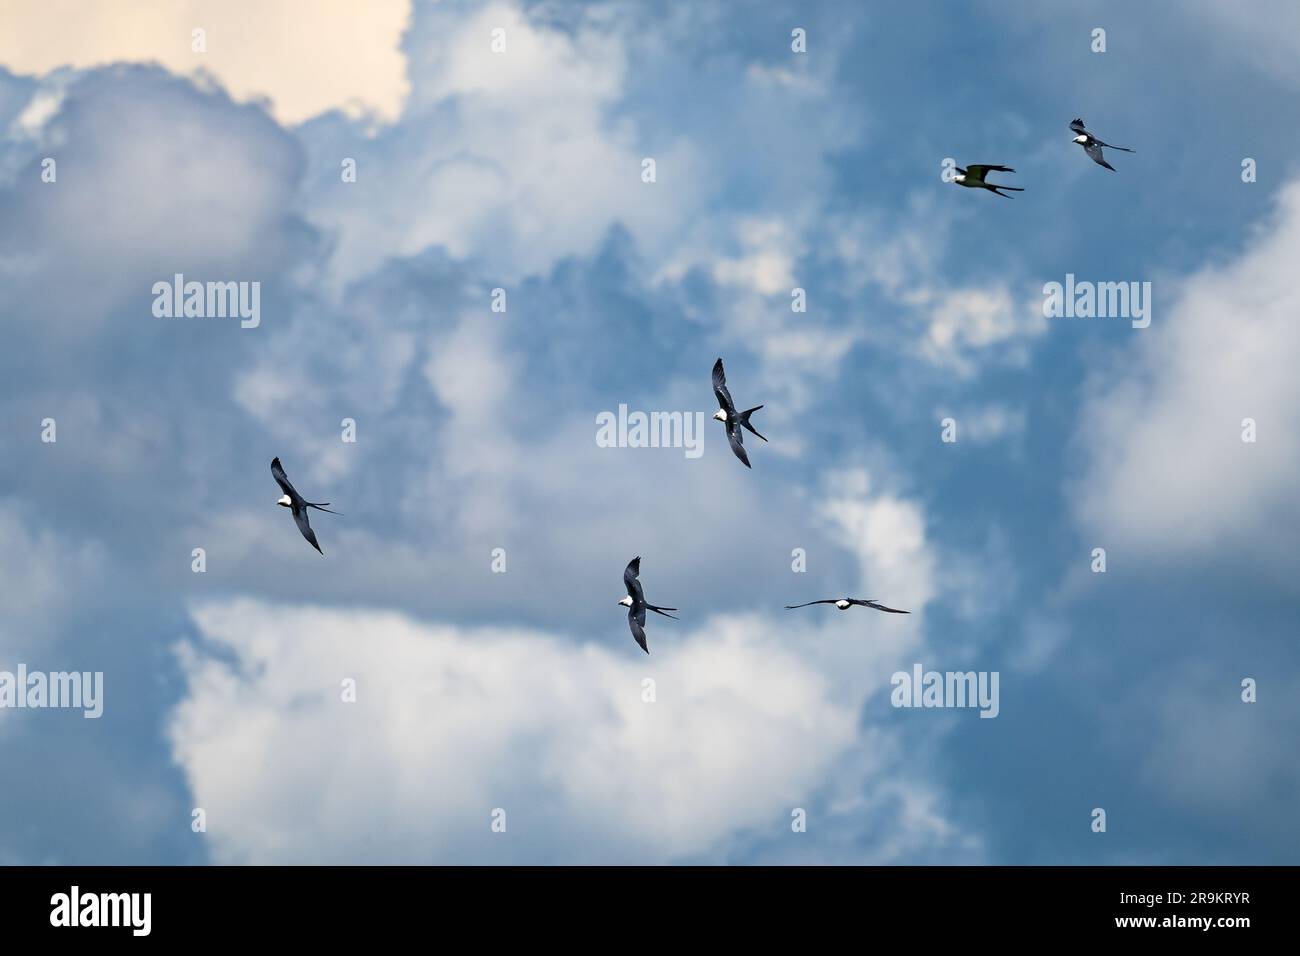 Several Swallow-tailed Kites (Elanoides forficatus) soaring in sky. Colombia, South America. Stock Photo